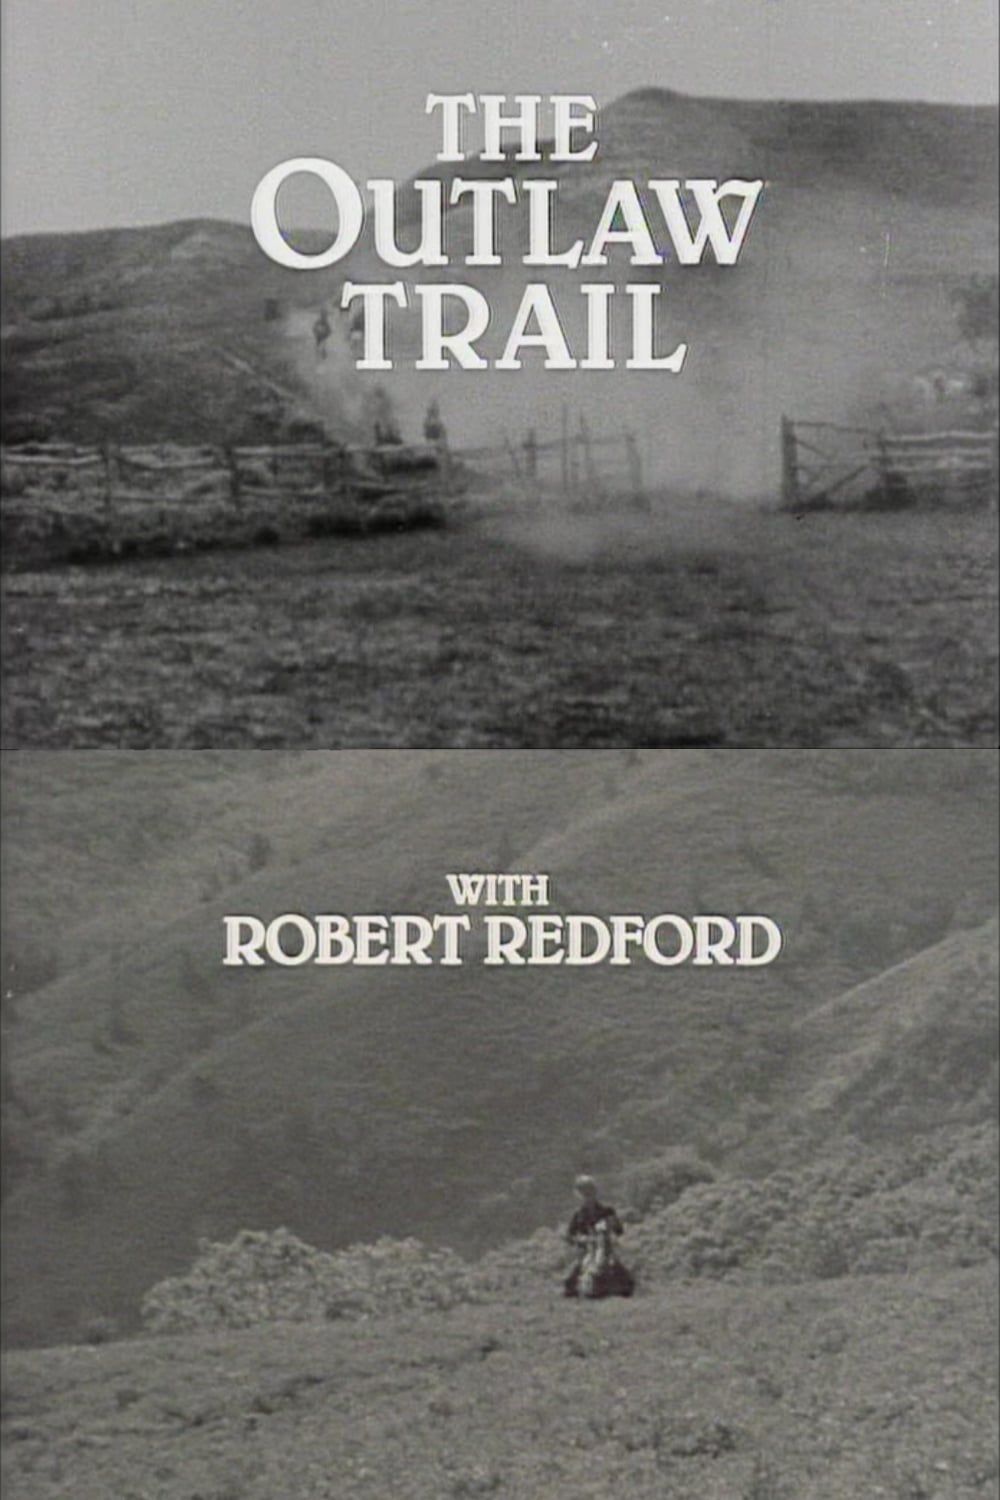 The Outlaw Trail with Robert Redford